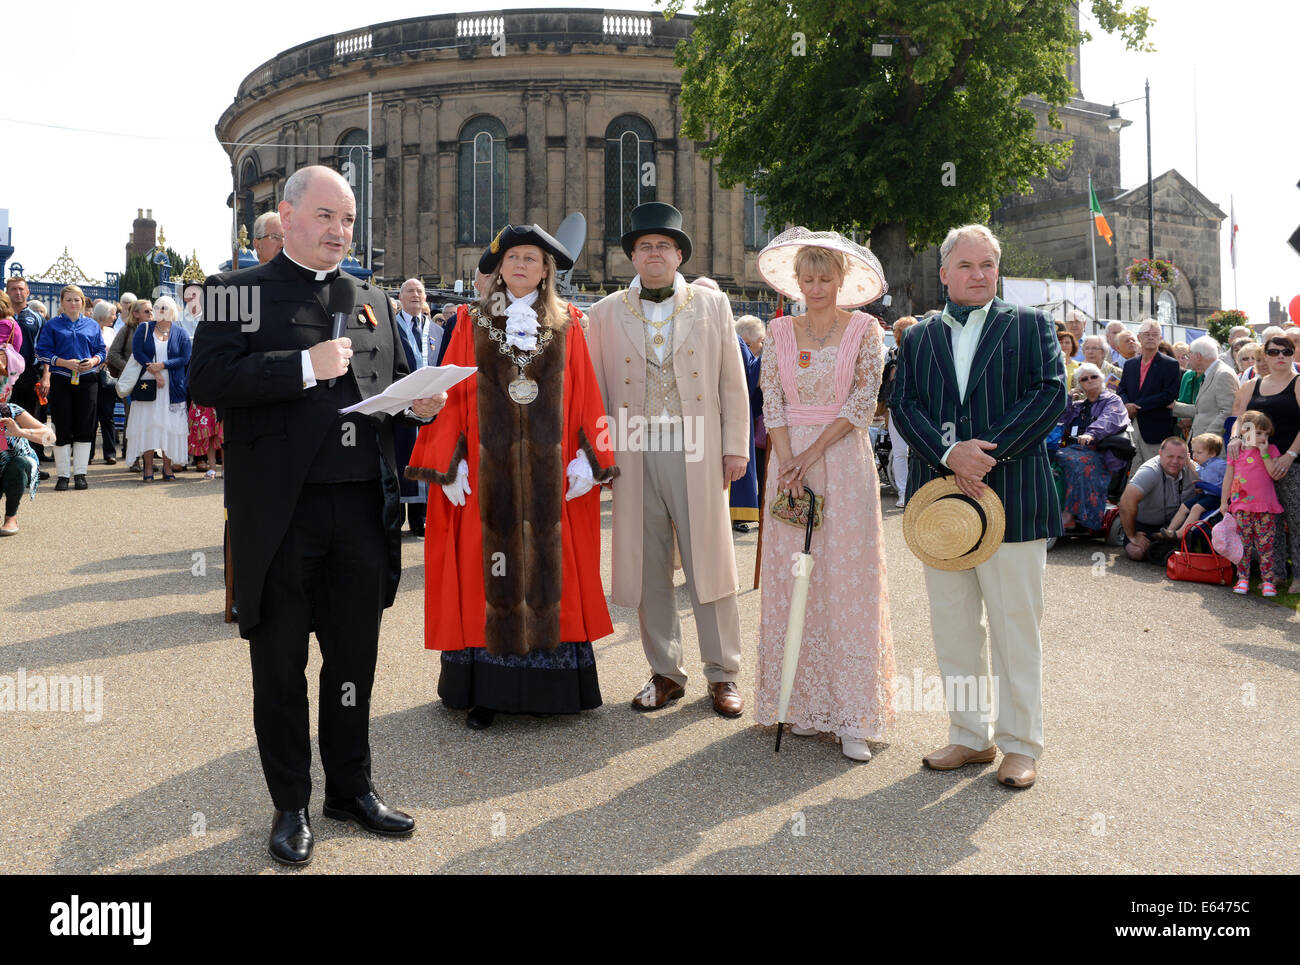 The Canon Chancellor of St Paul's Cathedral in London Rev Mark Oakley at Shrewsbury Flower Show 8th August 2014. The Mayor Counc Stock Photo